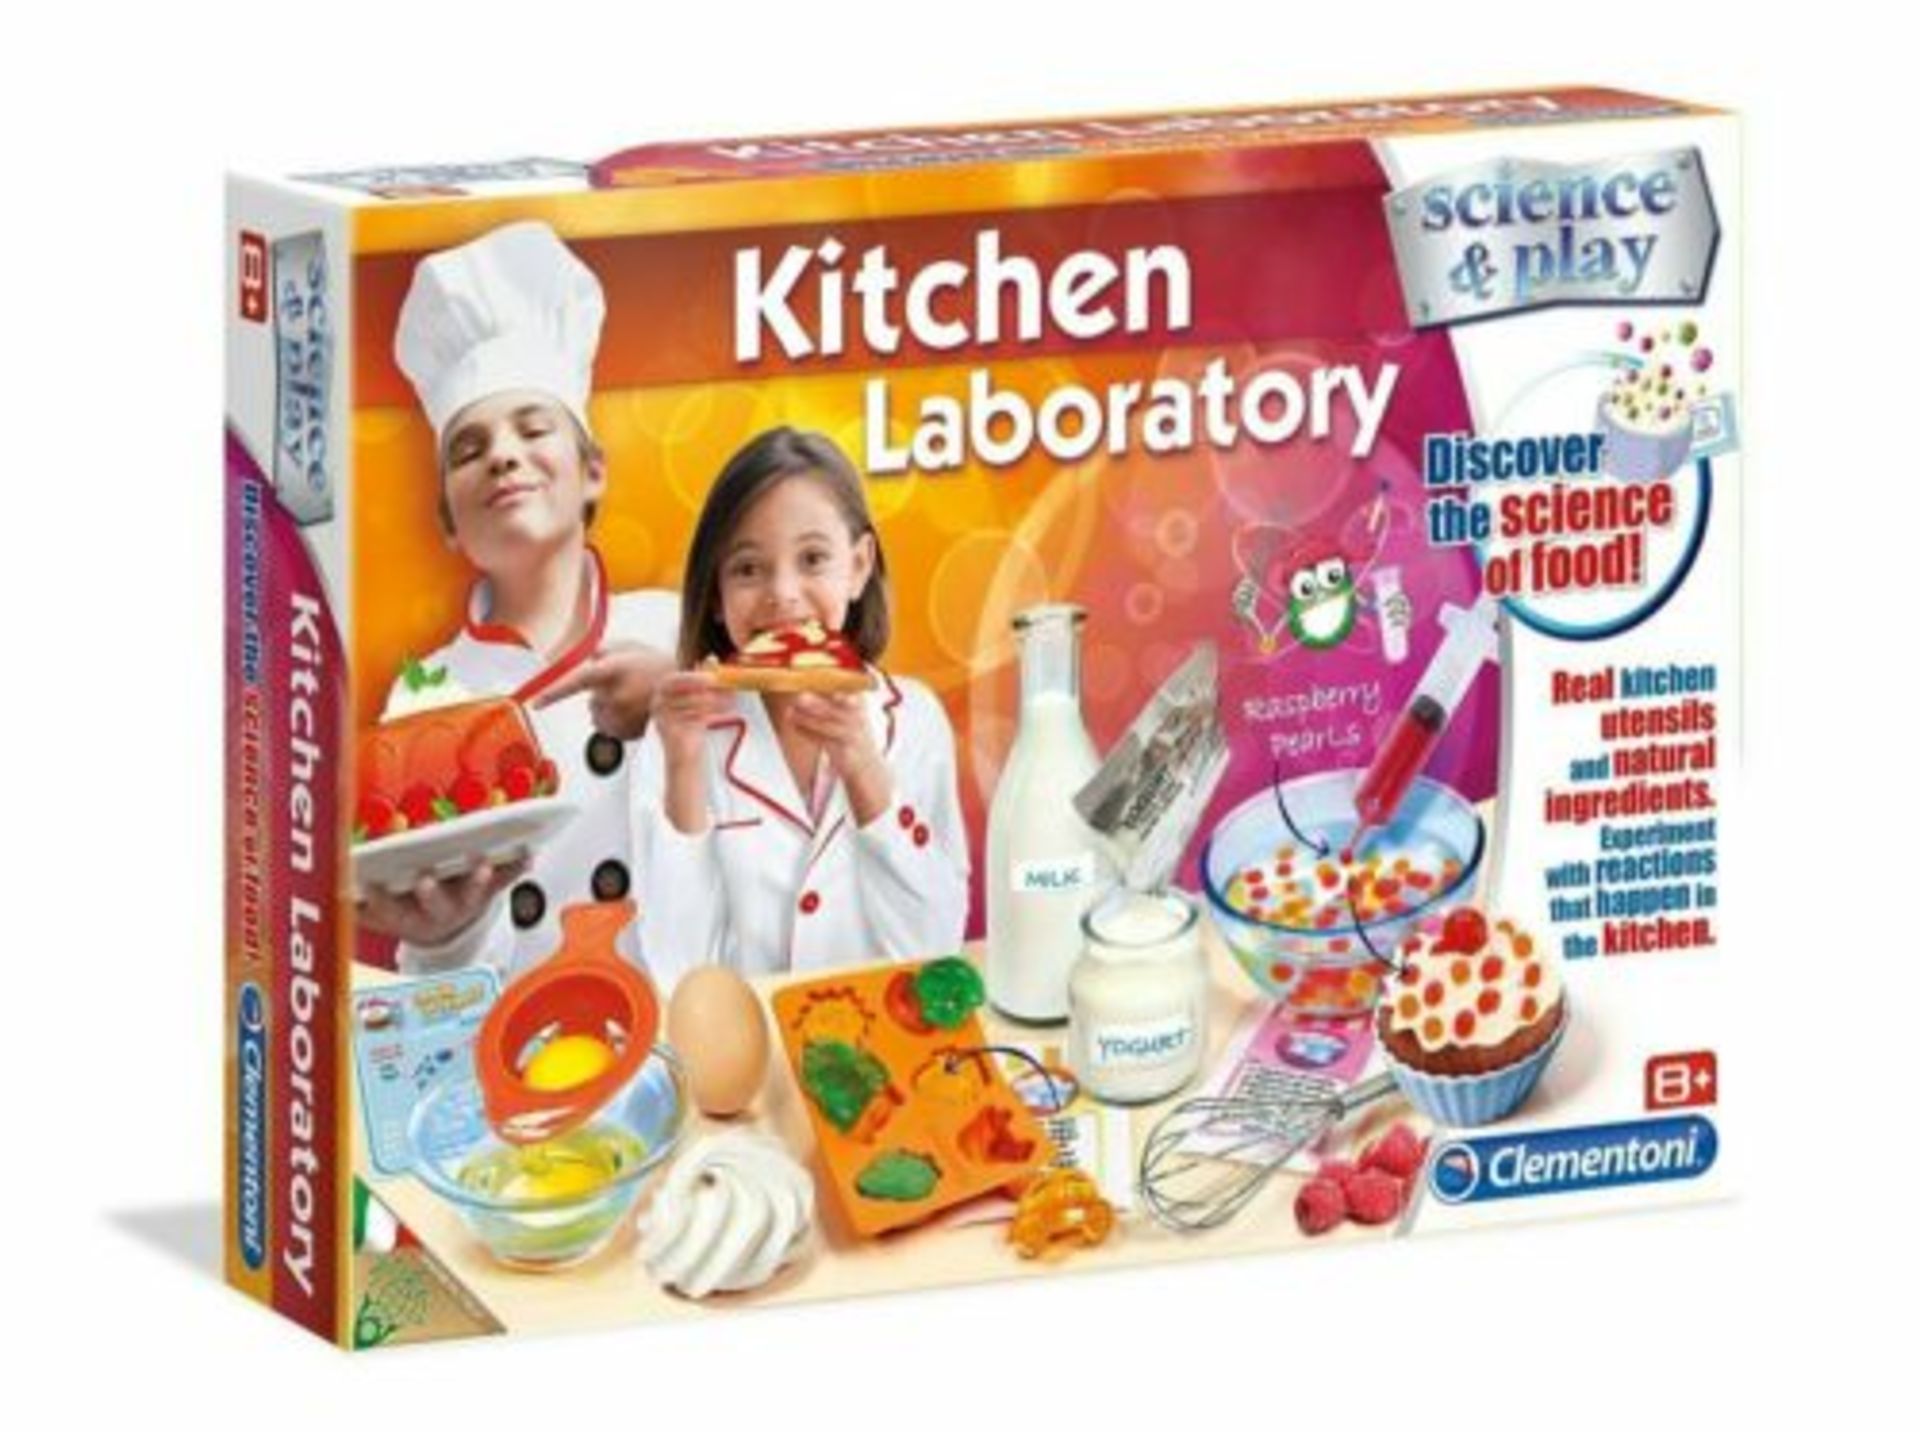 6 BRAND NEW CLEMENTONI SCIENCE & PLAY KITCHEN LABORATORY EDUCATIONAL KIT RRP Â£119 (THIS SET HAS